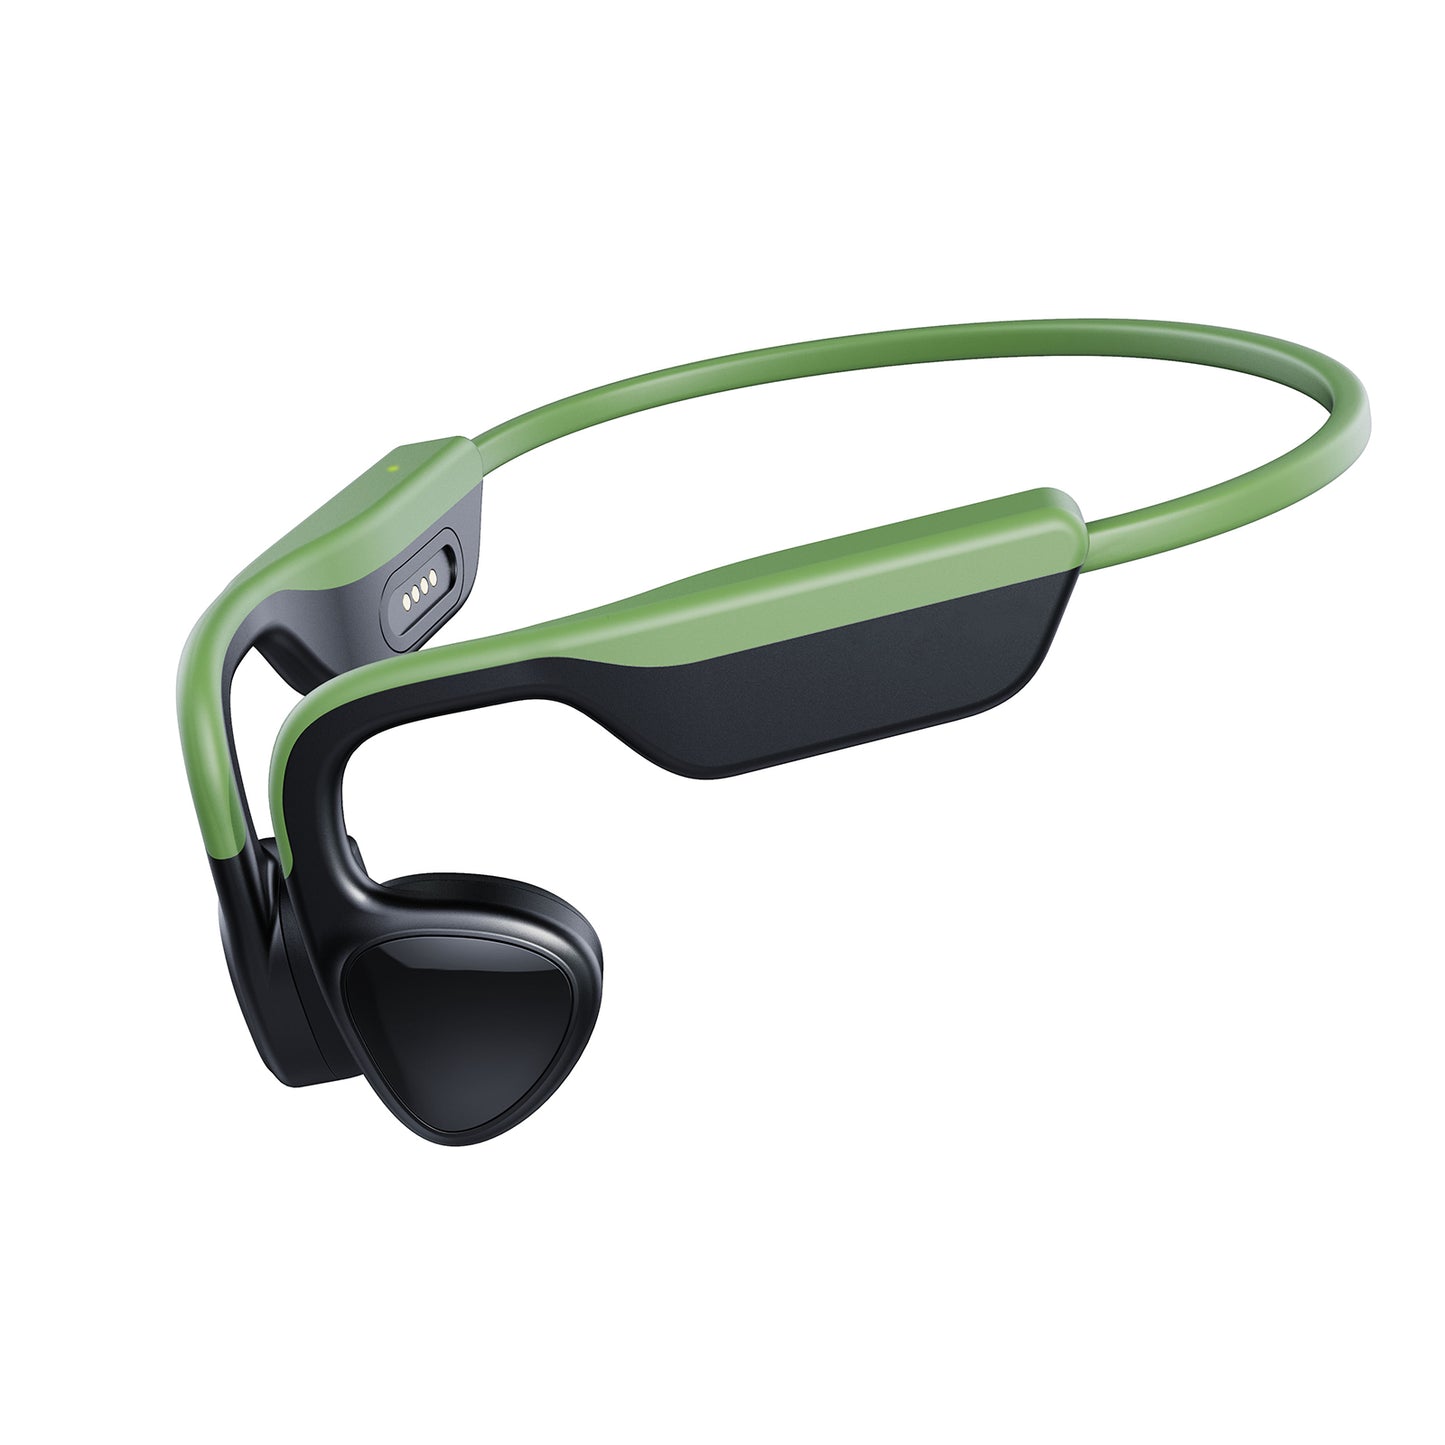 GM Bone conduction Swimming Bluetooth Wireless Headset X19 comes with 8G memory MP3 in-ear running headset